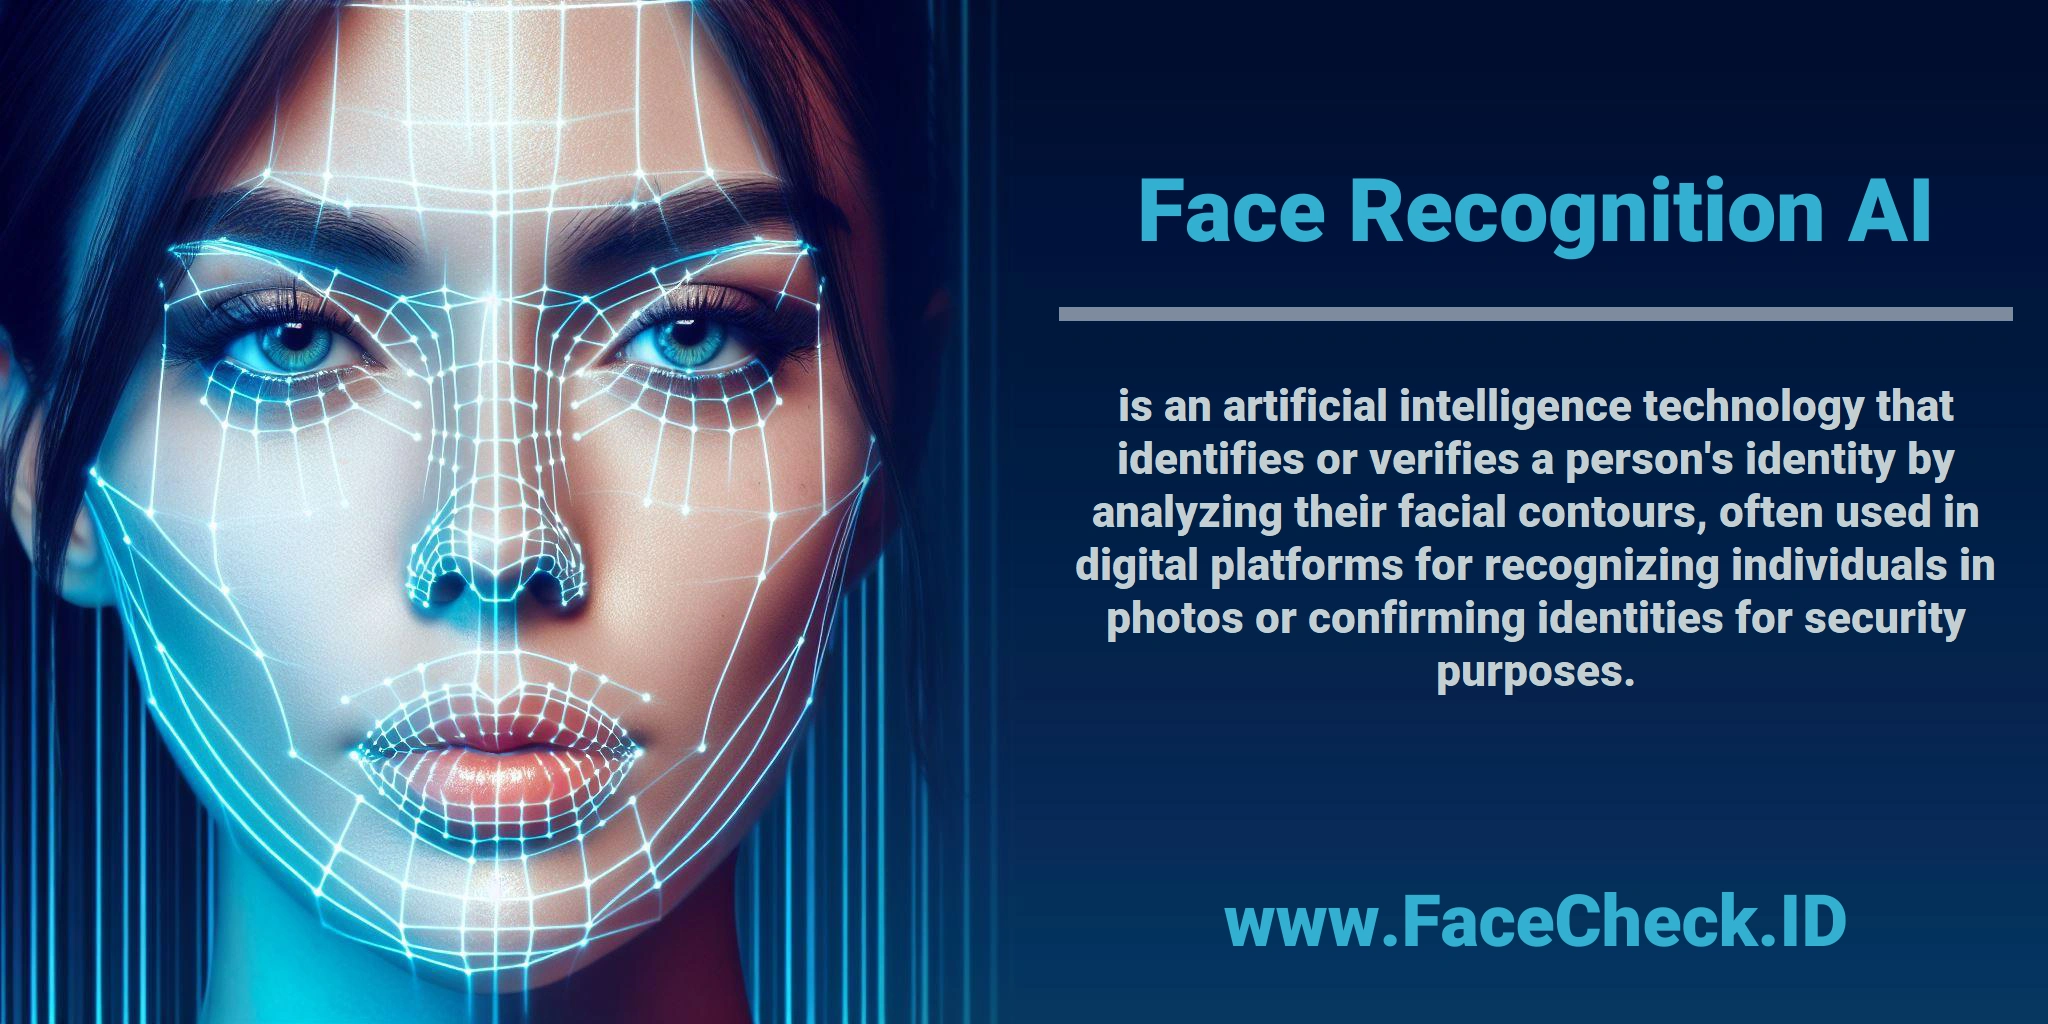 <b>Face Recognition AI</b> is an artificial intelligence technology that identifies or verifies a person's identity by analyzing their facial contours, often used in digital platforms for recognizing individuals in photos or confirming identities for security purposes.